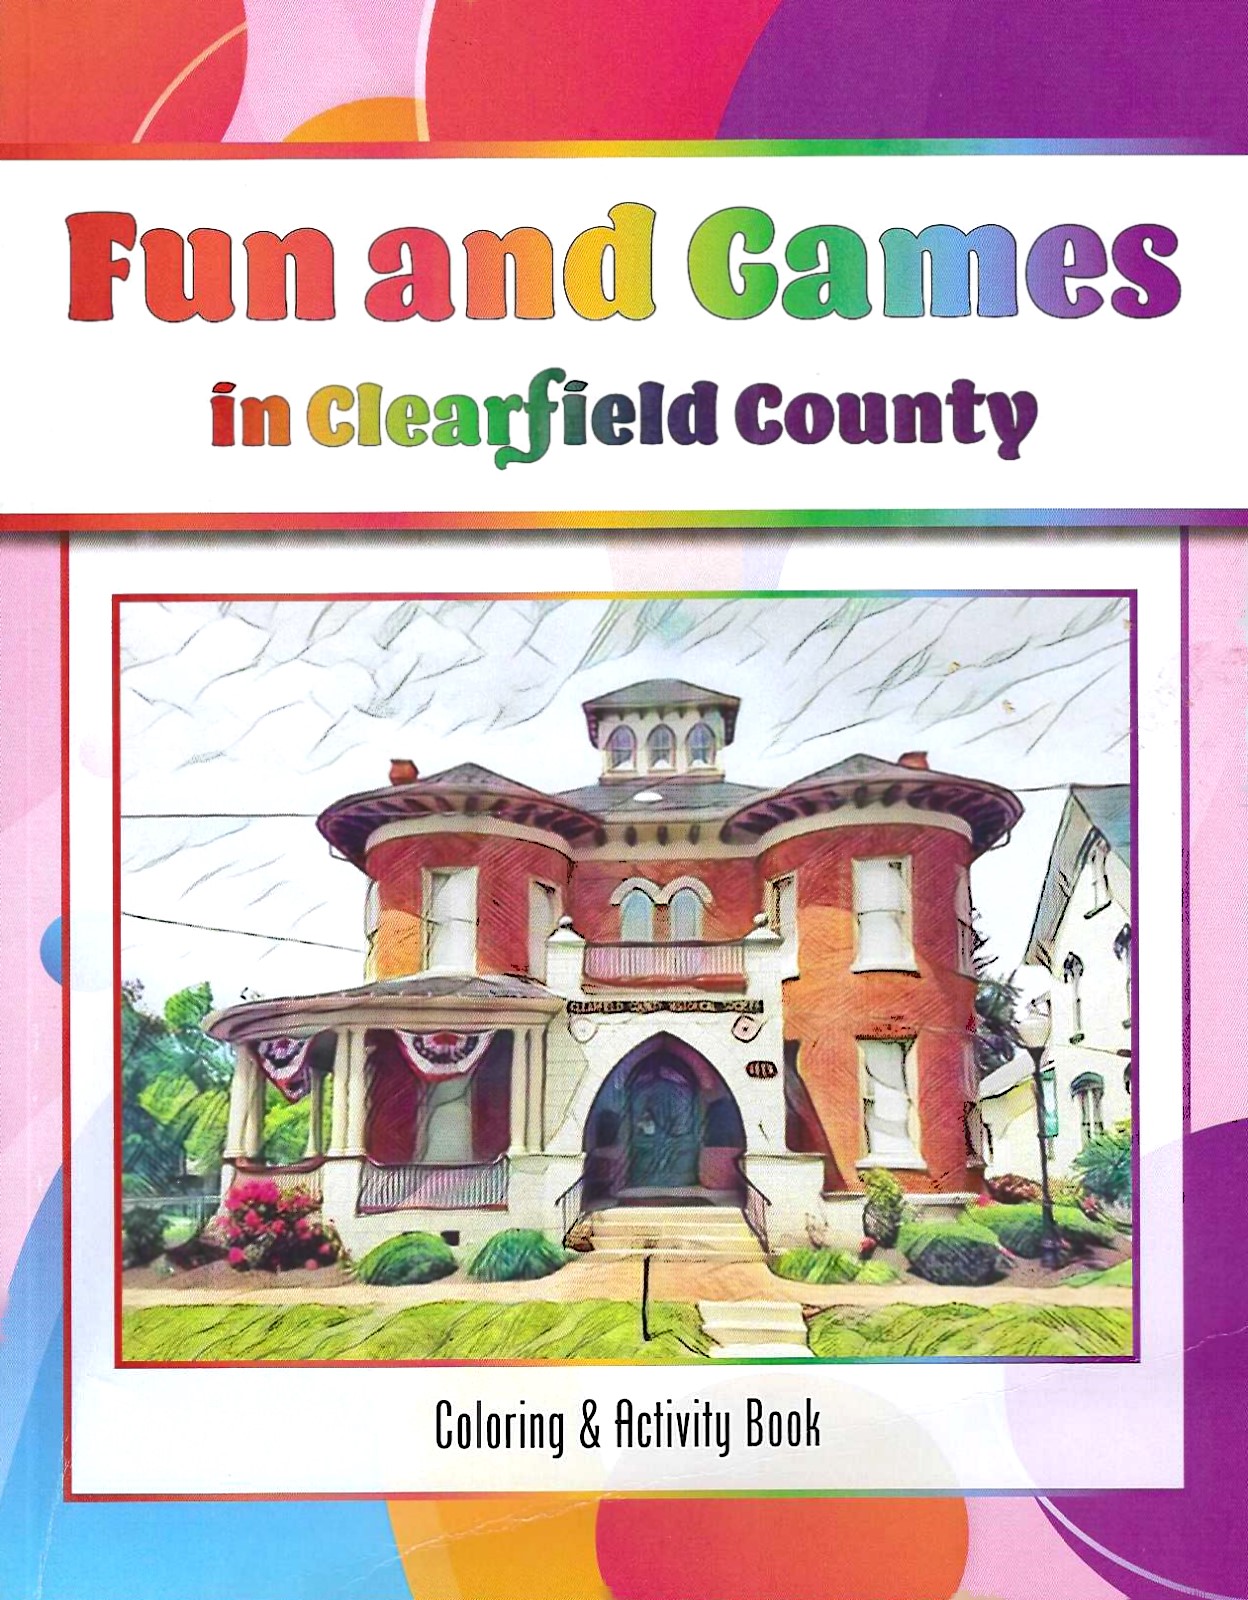 FUN and GAMES - Coloring & Activity Book